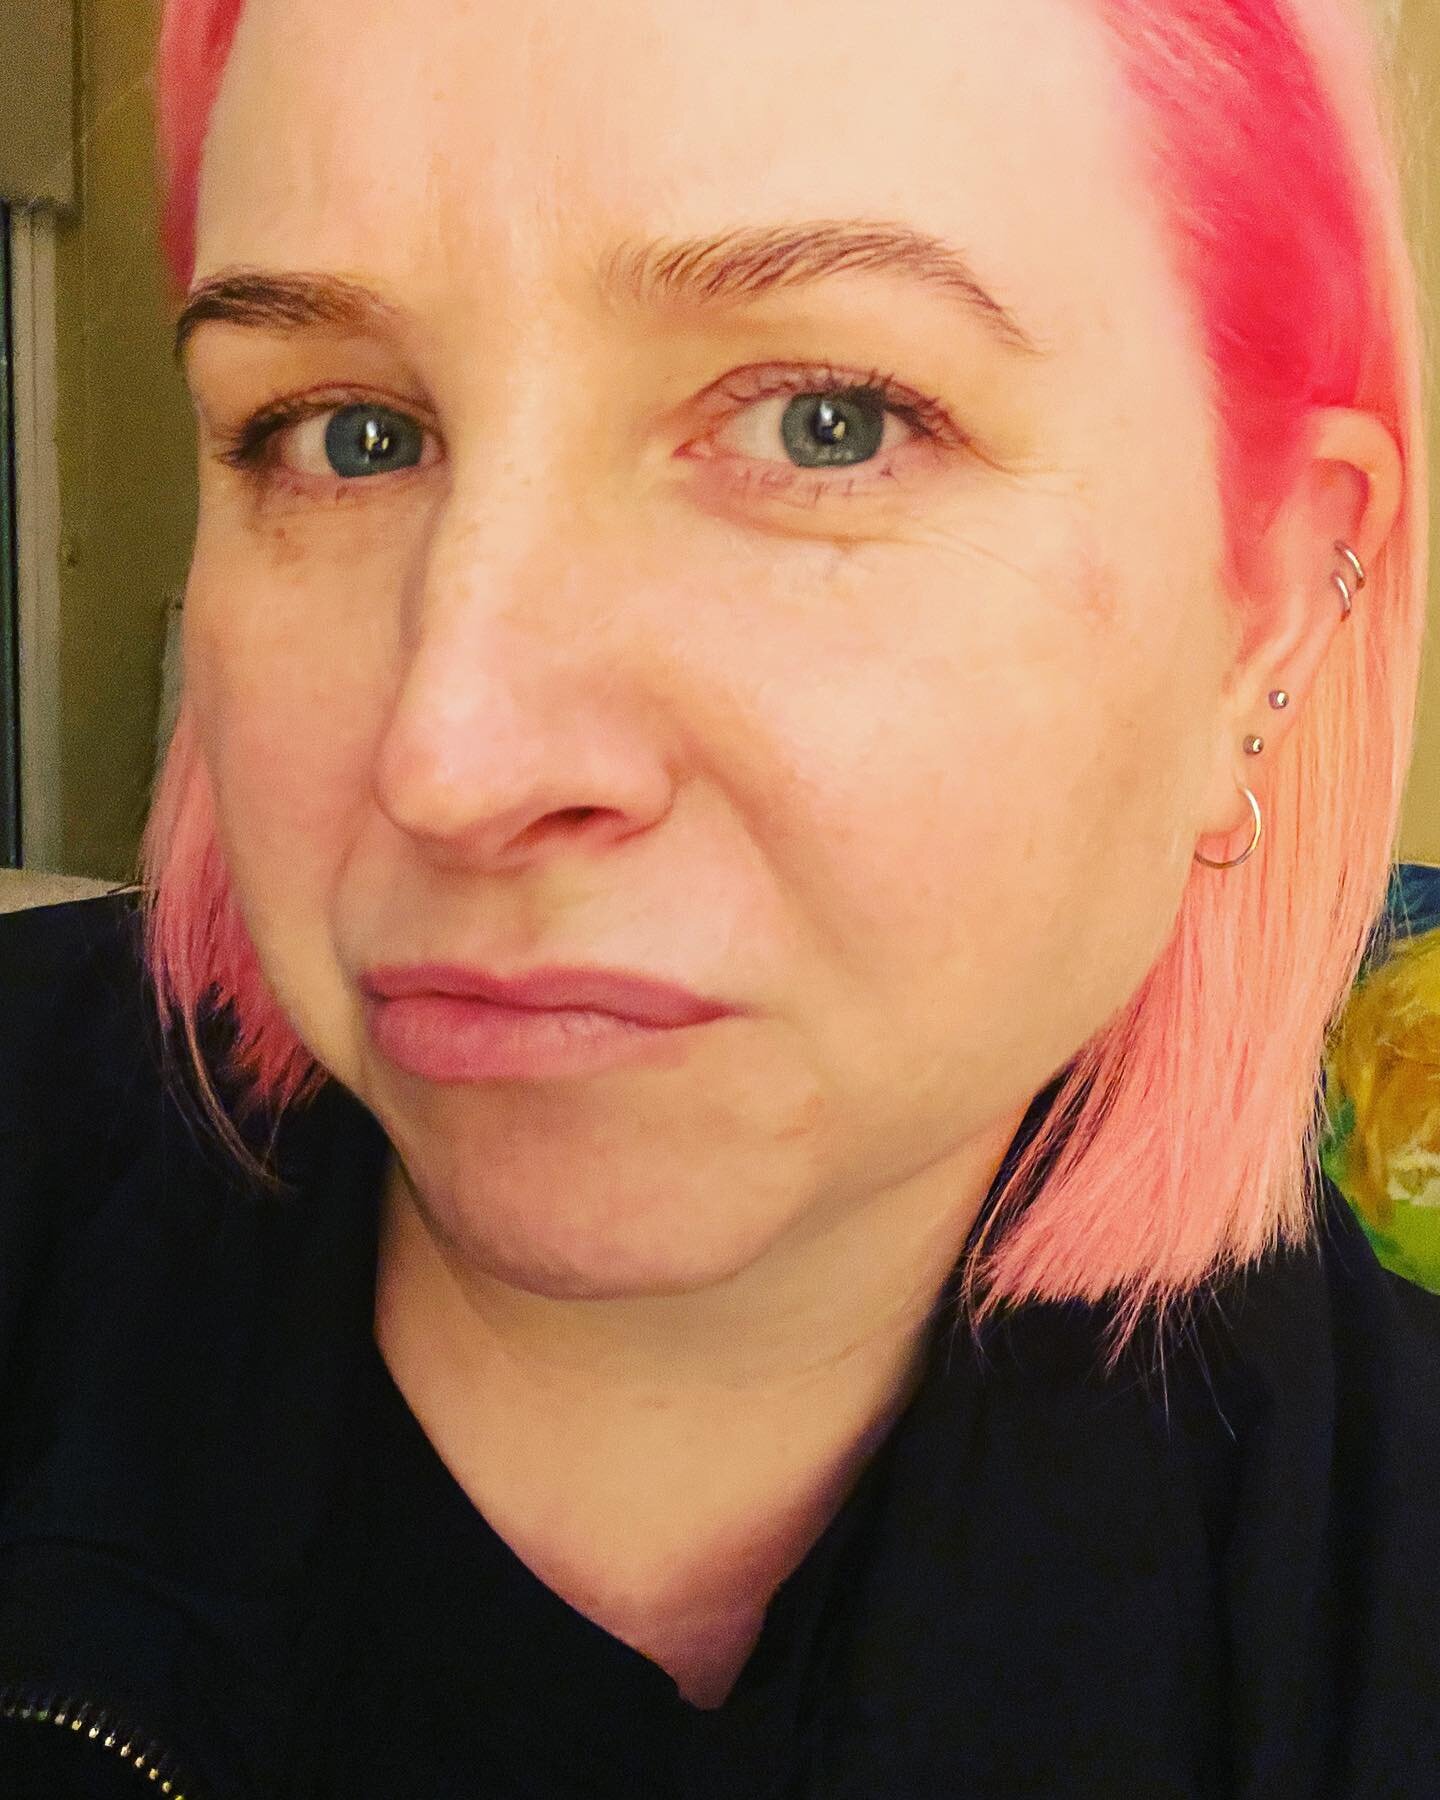 I have a coldsore in my eye. 

So. I have #pinkeye and #pinkhair 

This is #fashion.